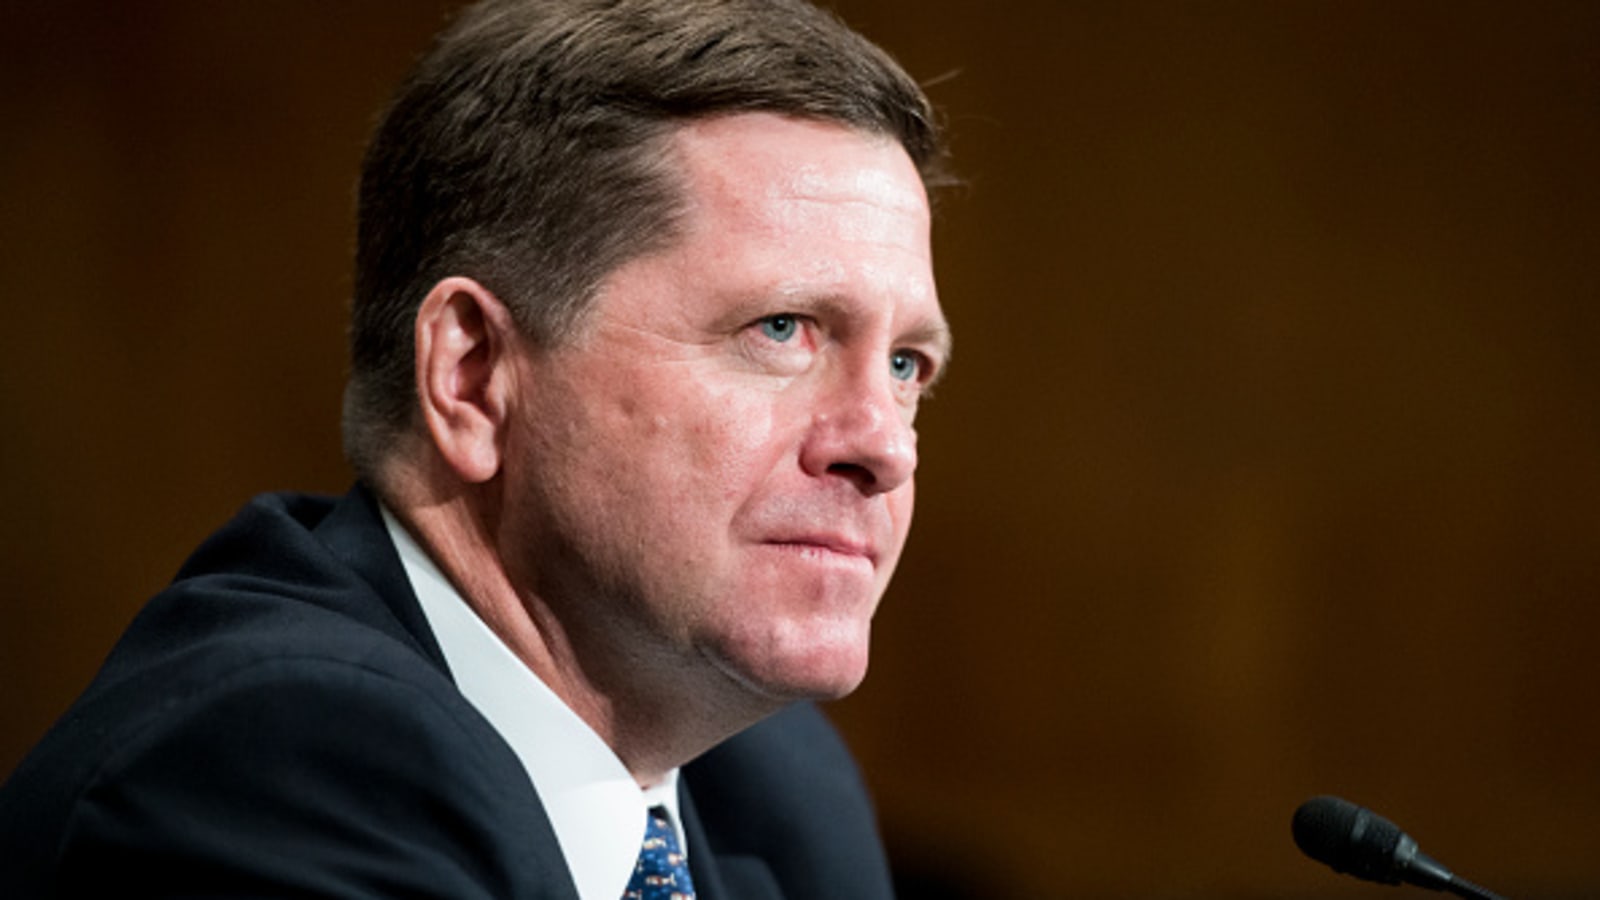 Former SEC chair Jay Clayton tips new Bitcoin regulations are coming